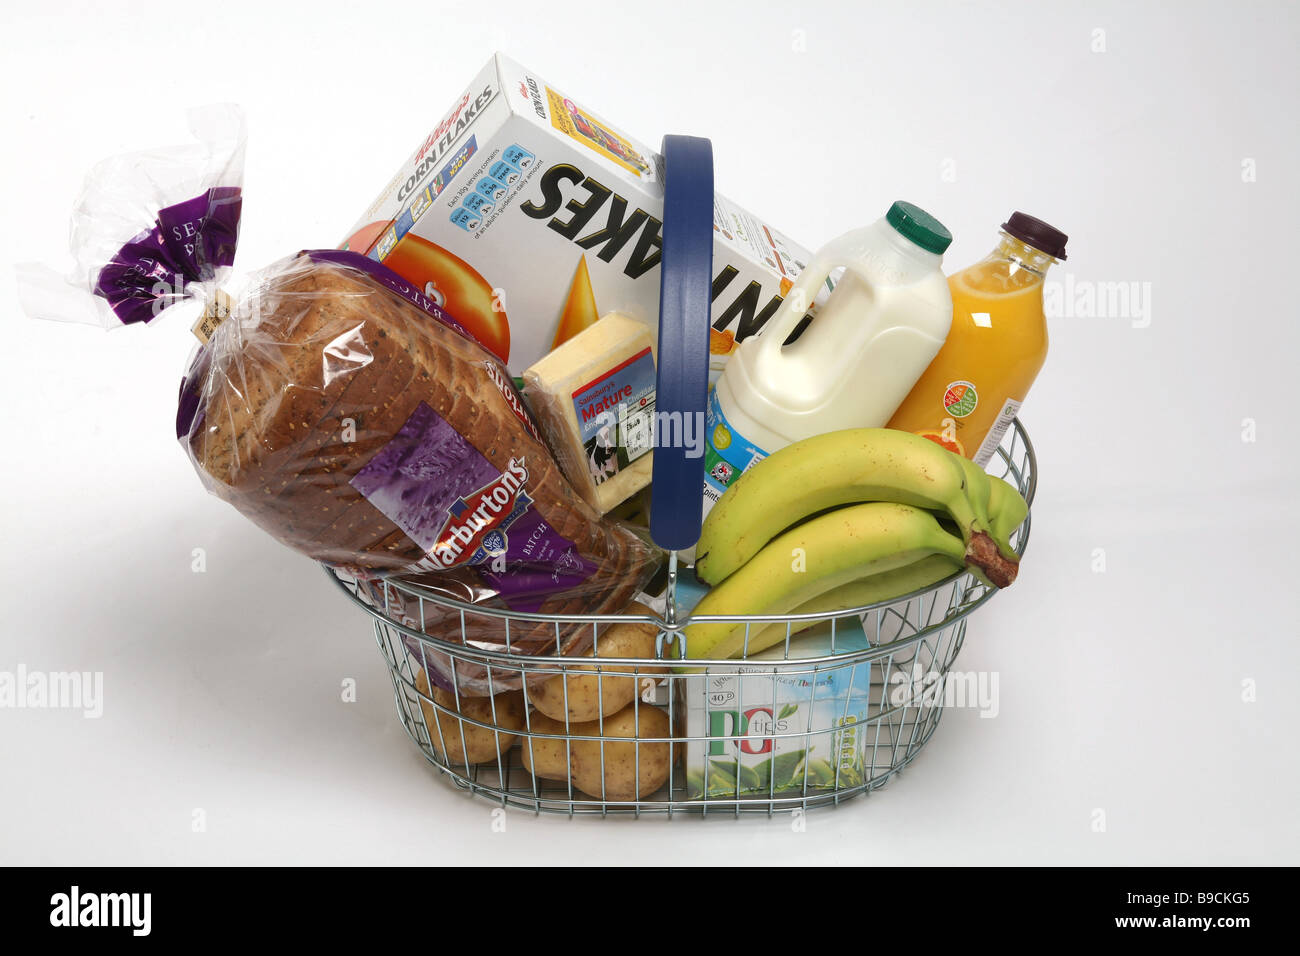 A shopping basket filled with groceries Stock Photo